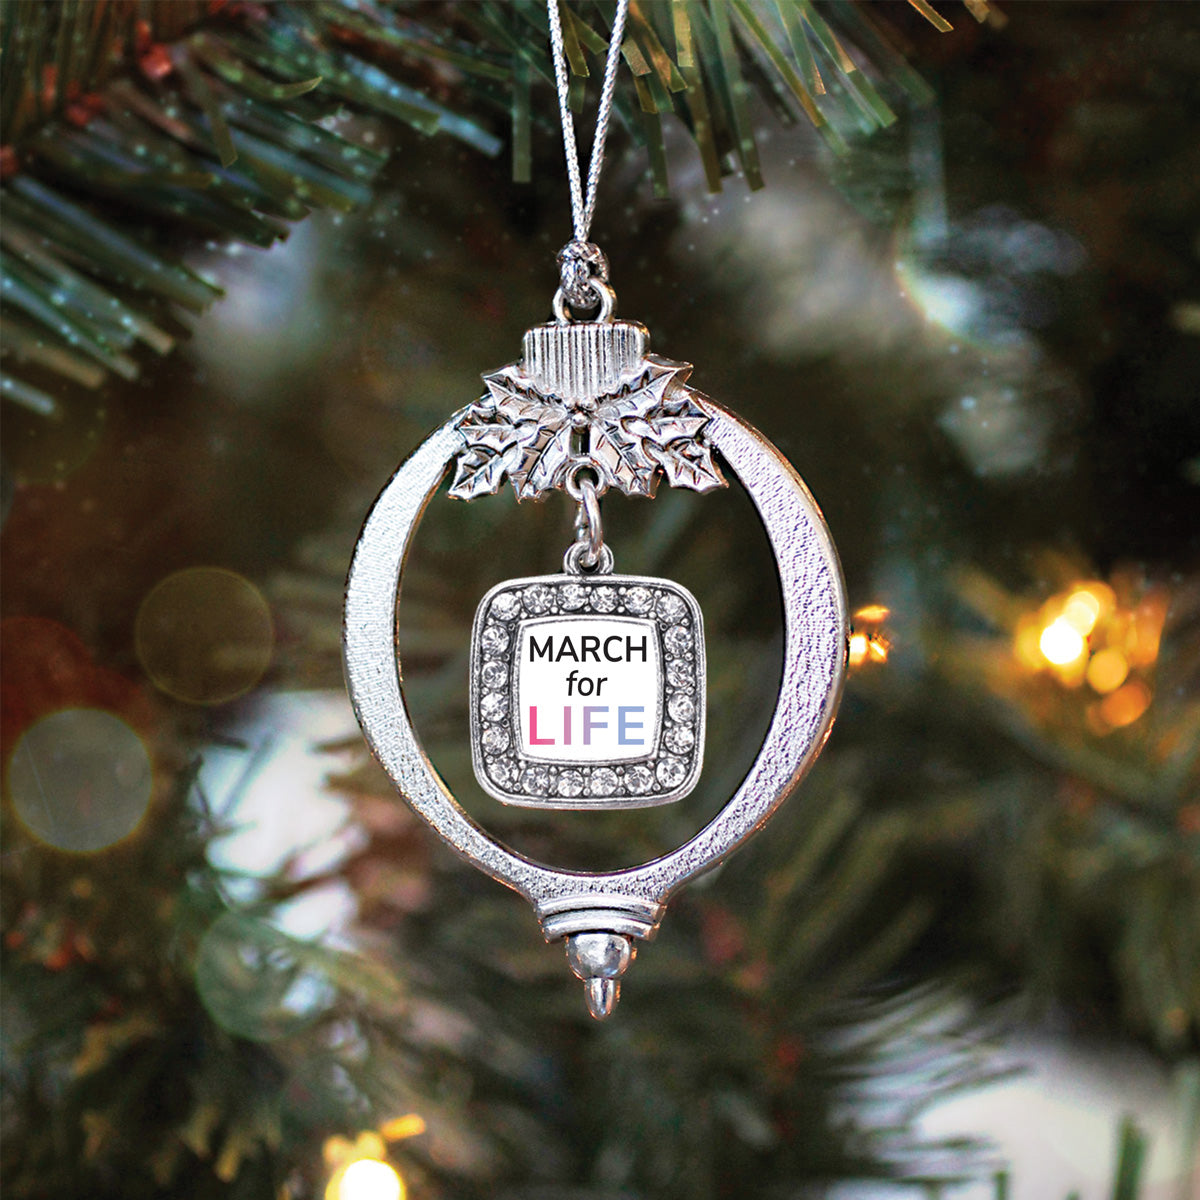 March For Life Square Charm Christmas / Holiday Ornament